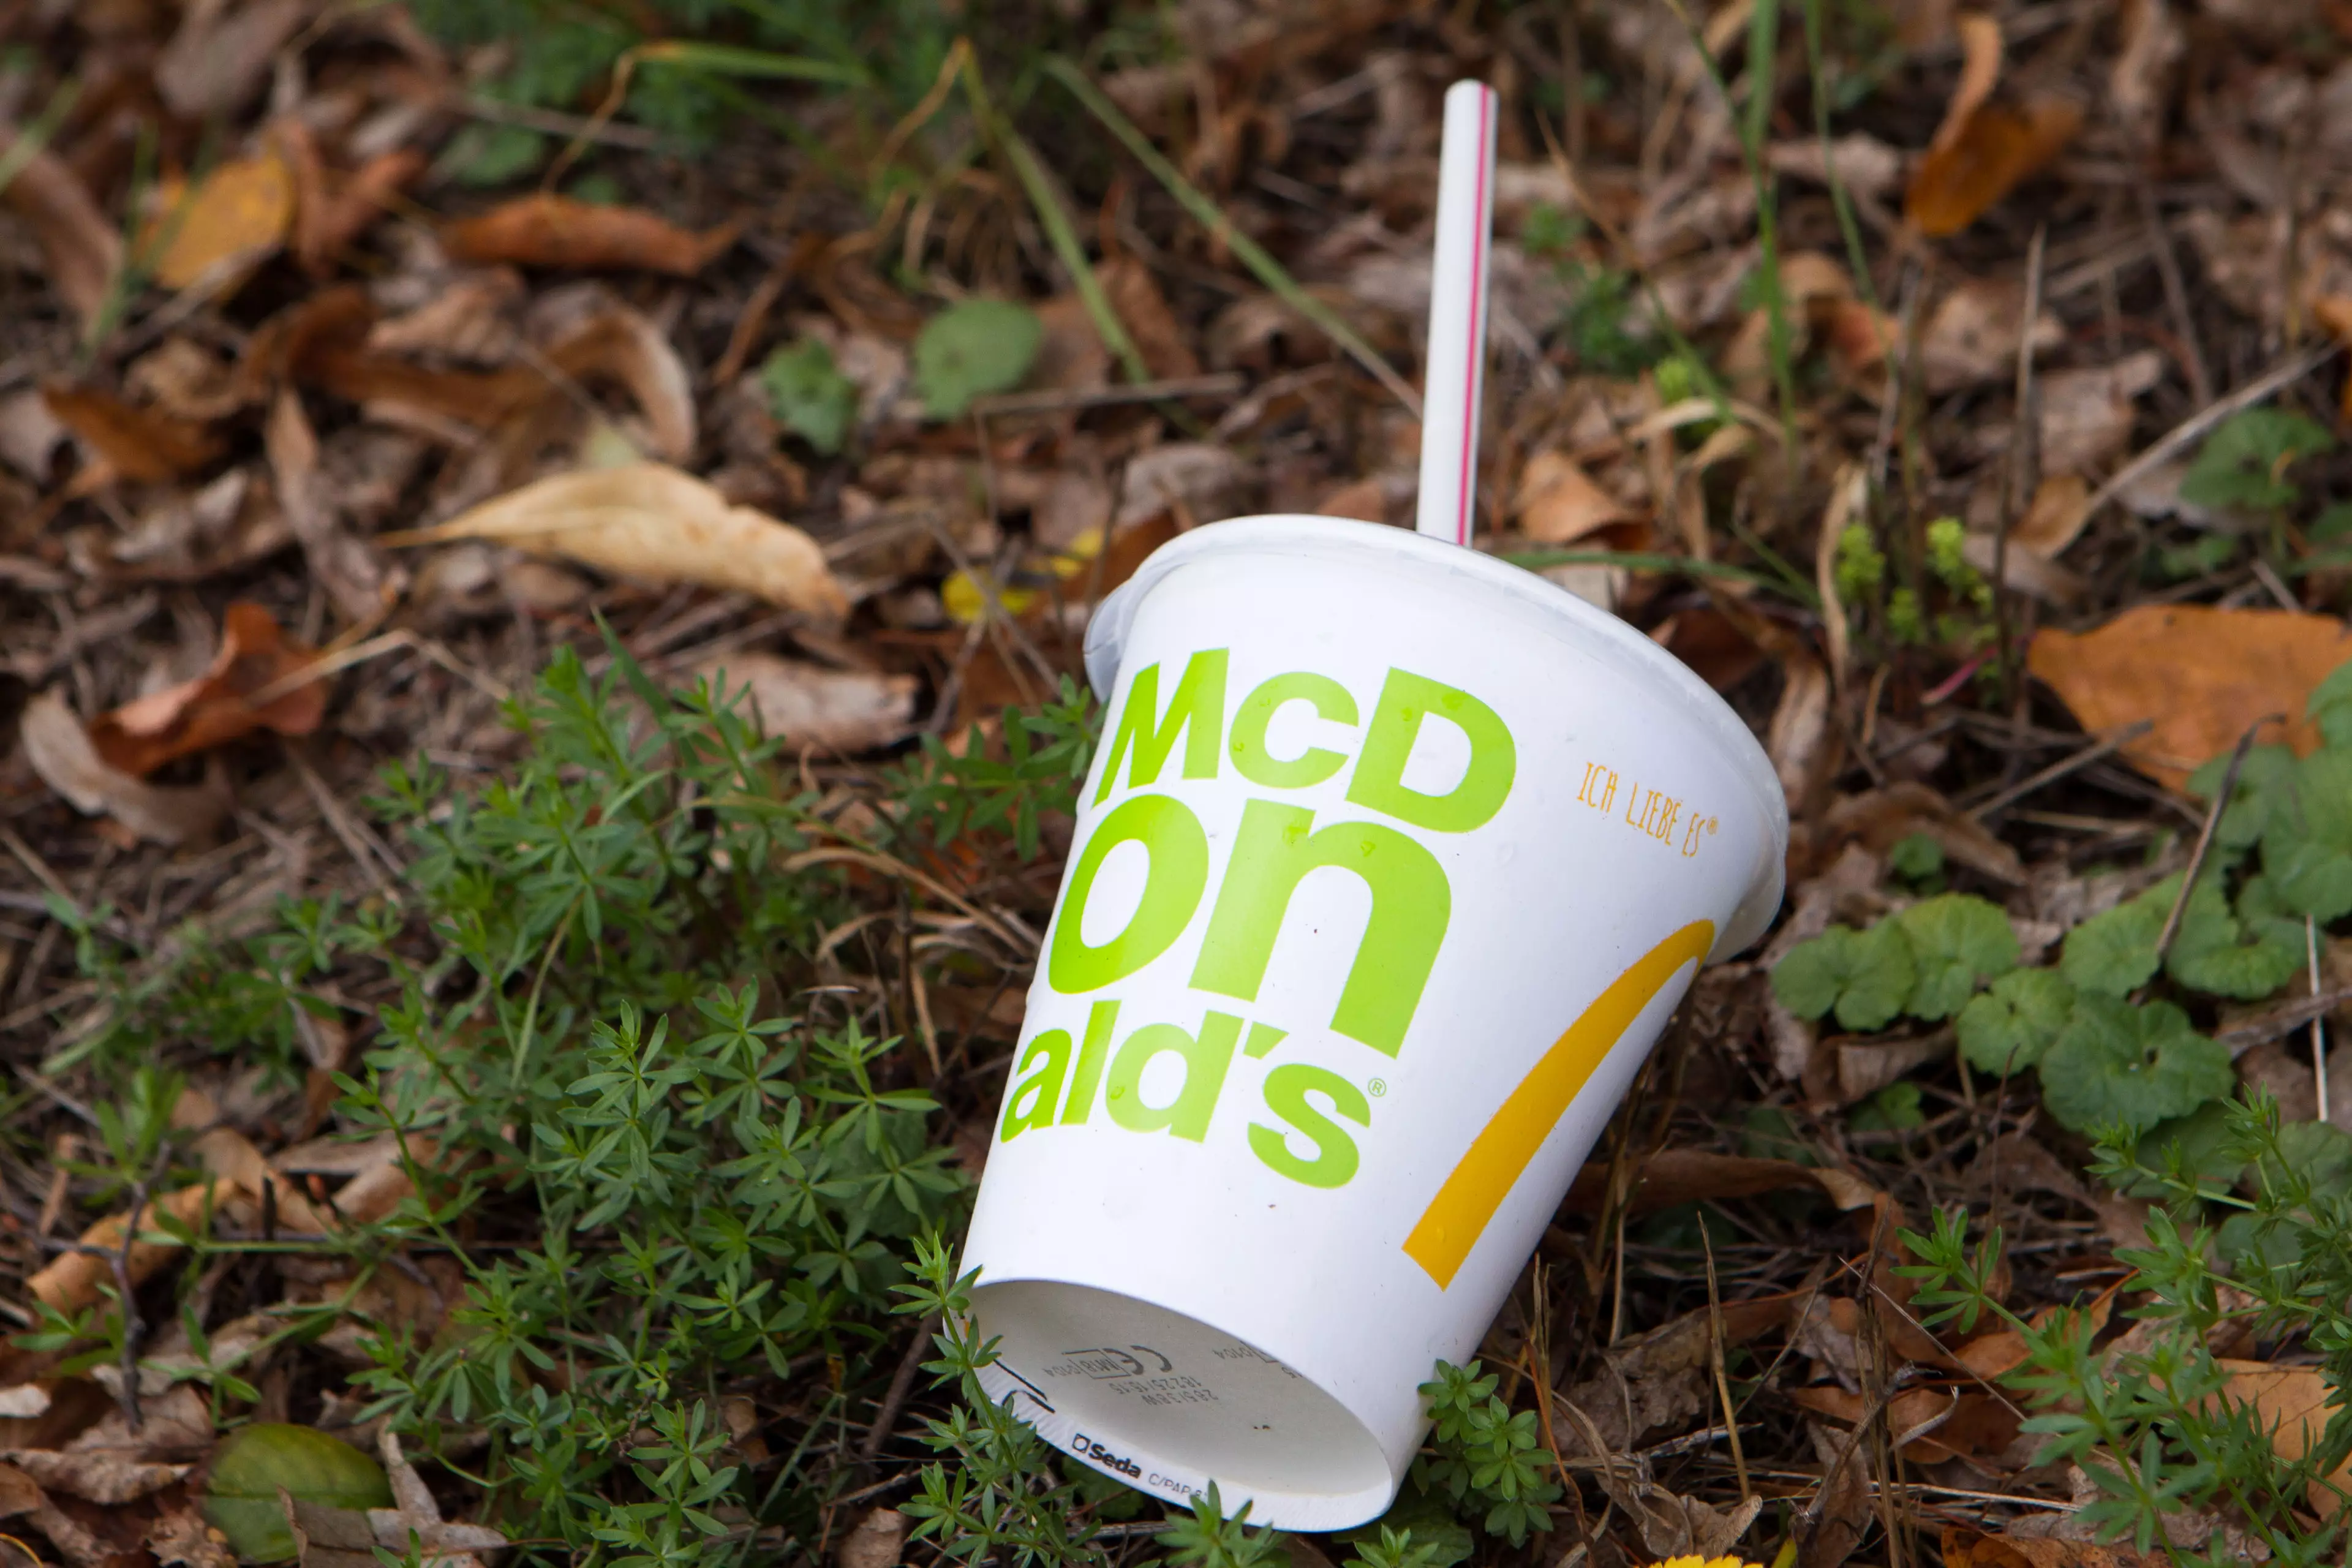 A McDonald's cup and straw.